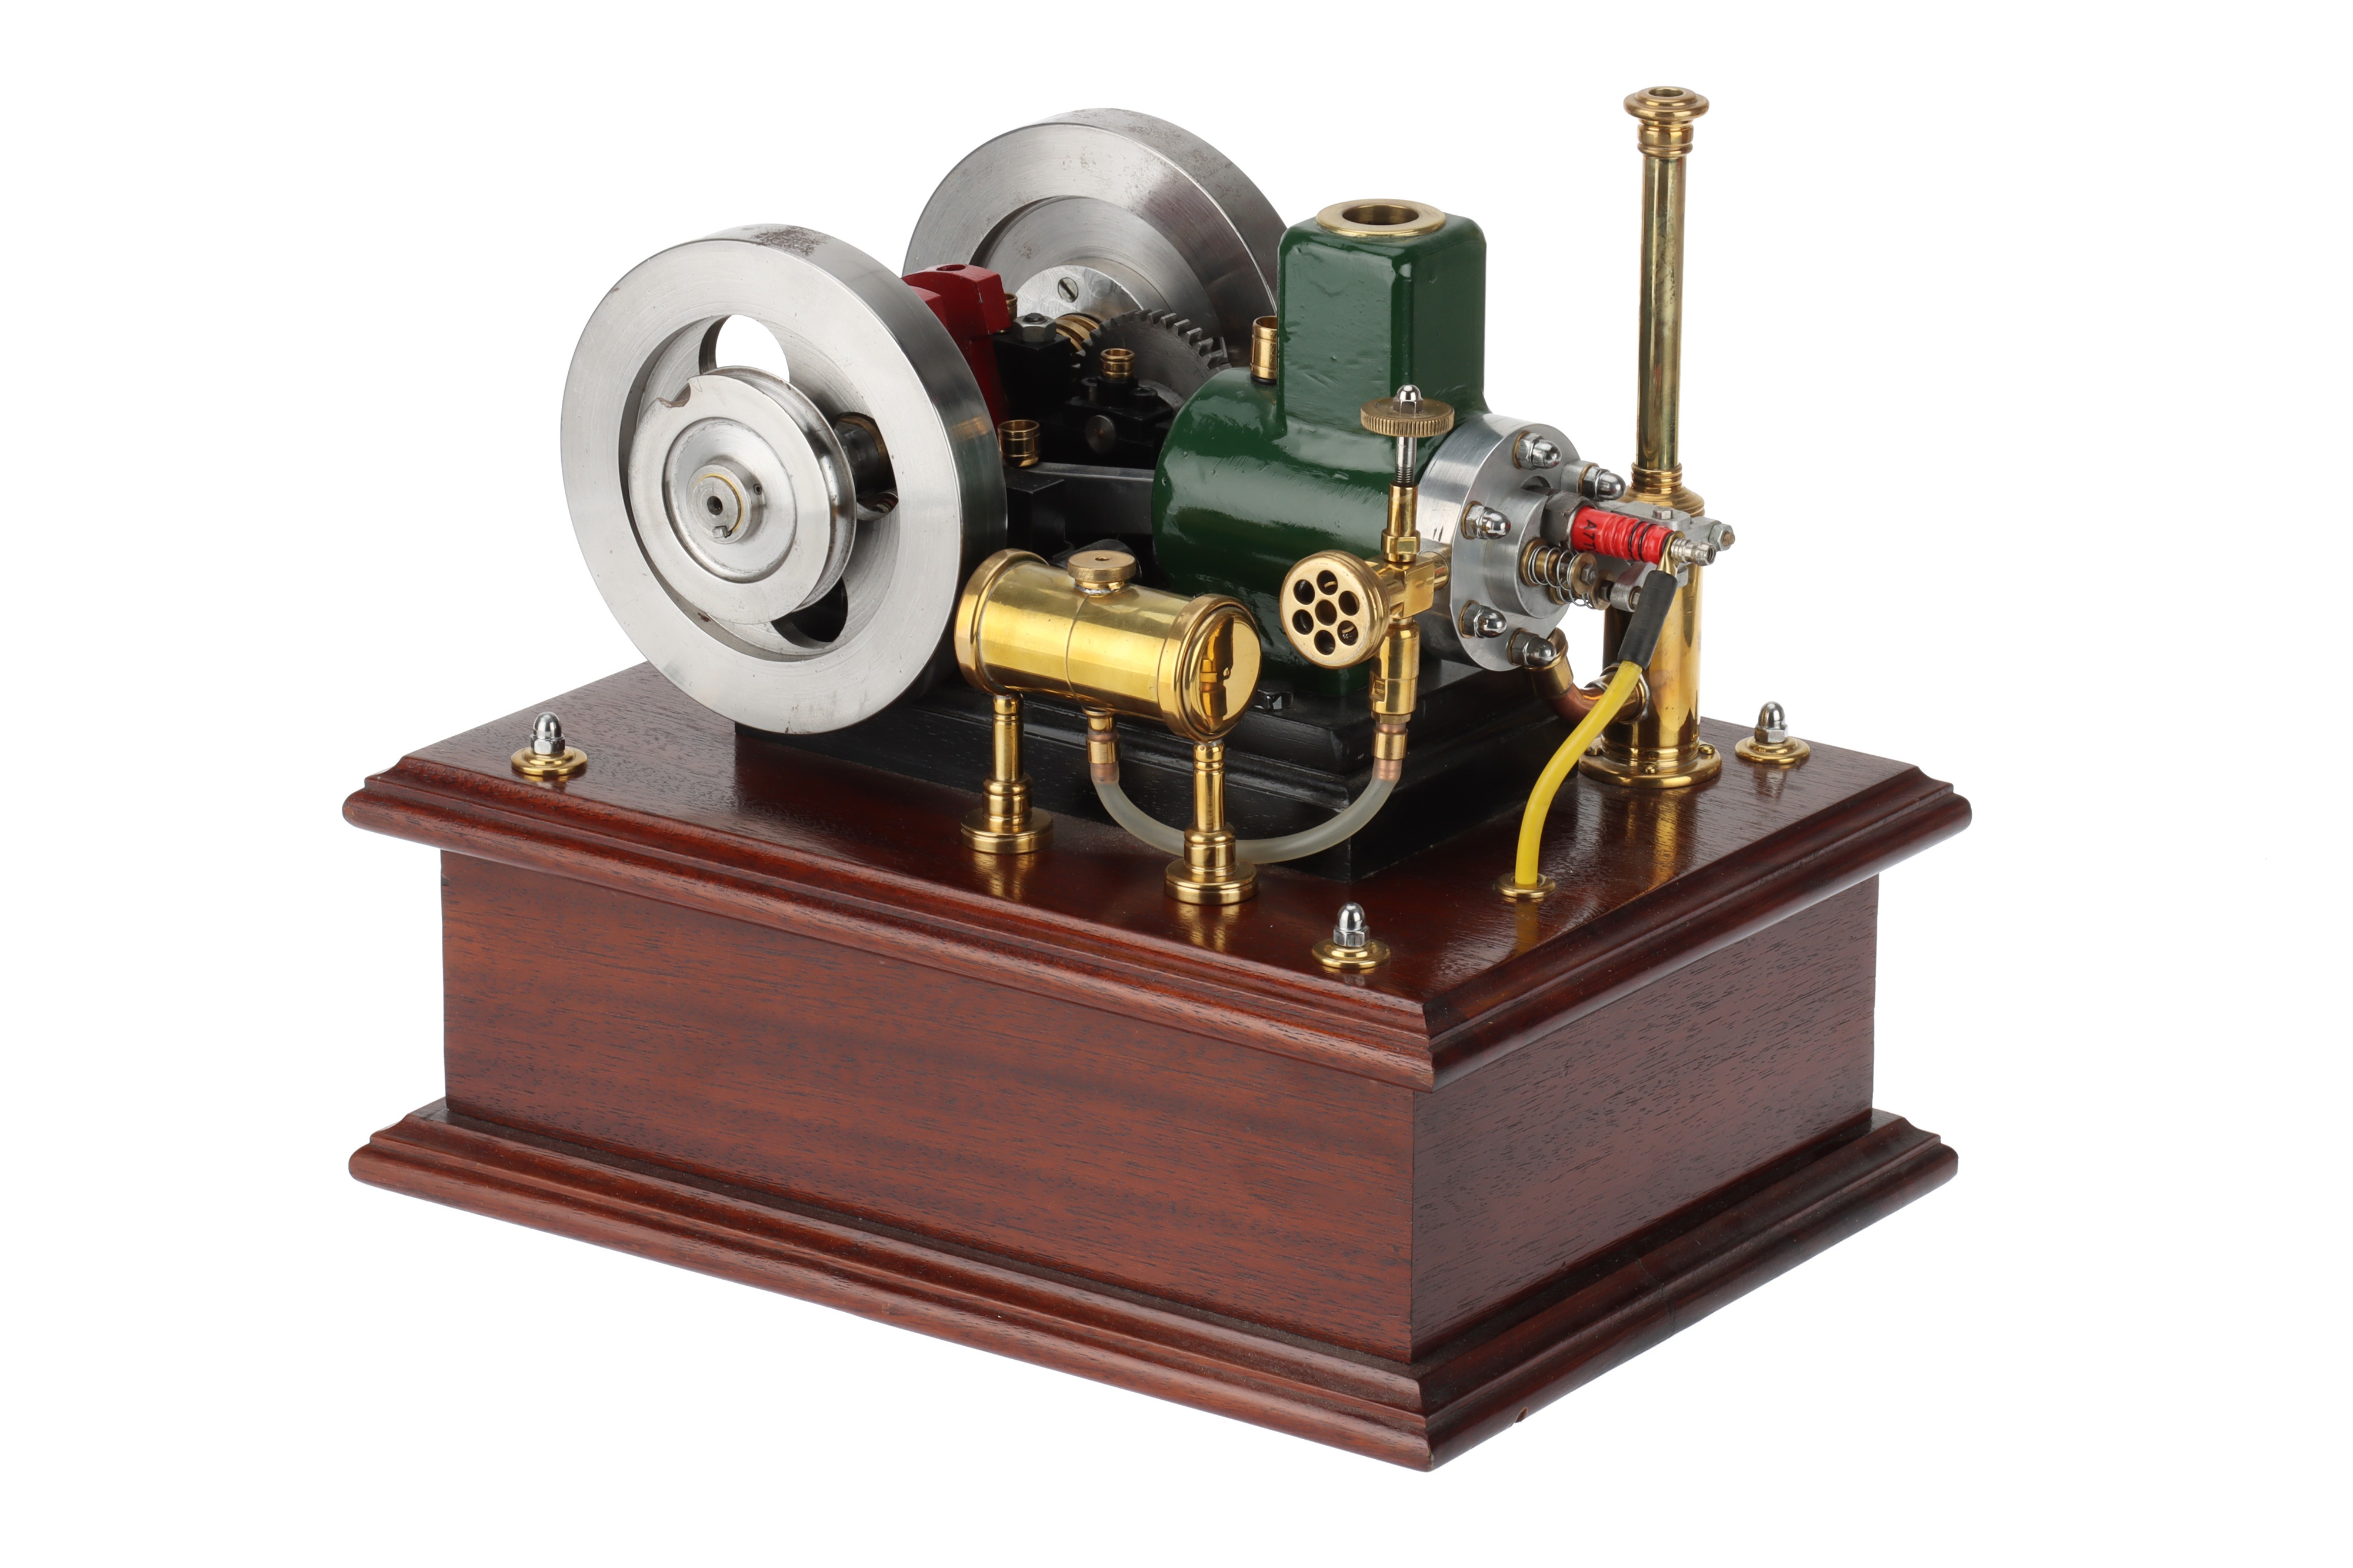 the engine with mounted on a polished oak base, with counterweight open crank, twin drilled disk